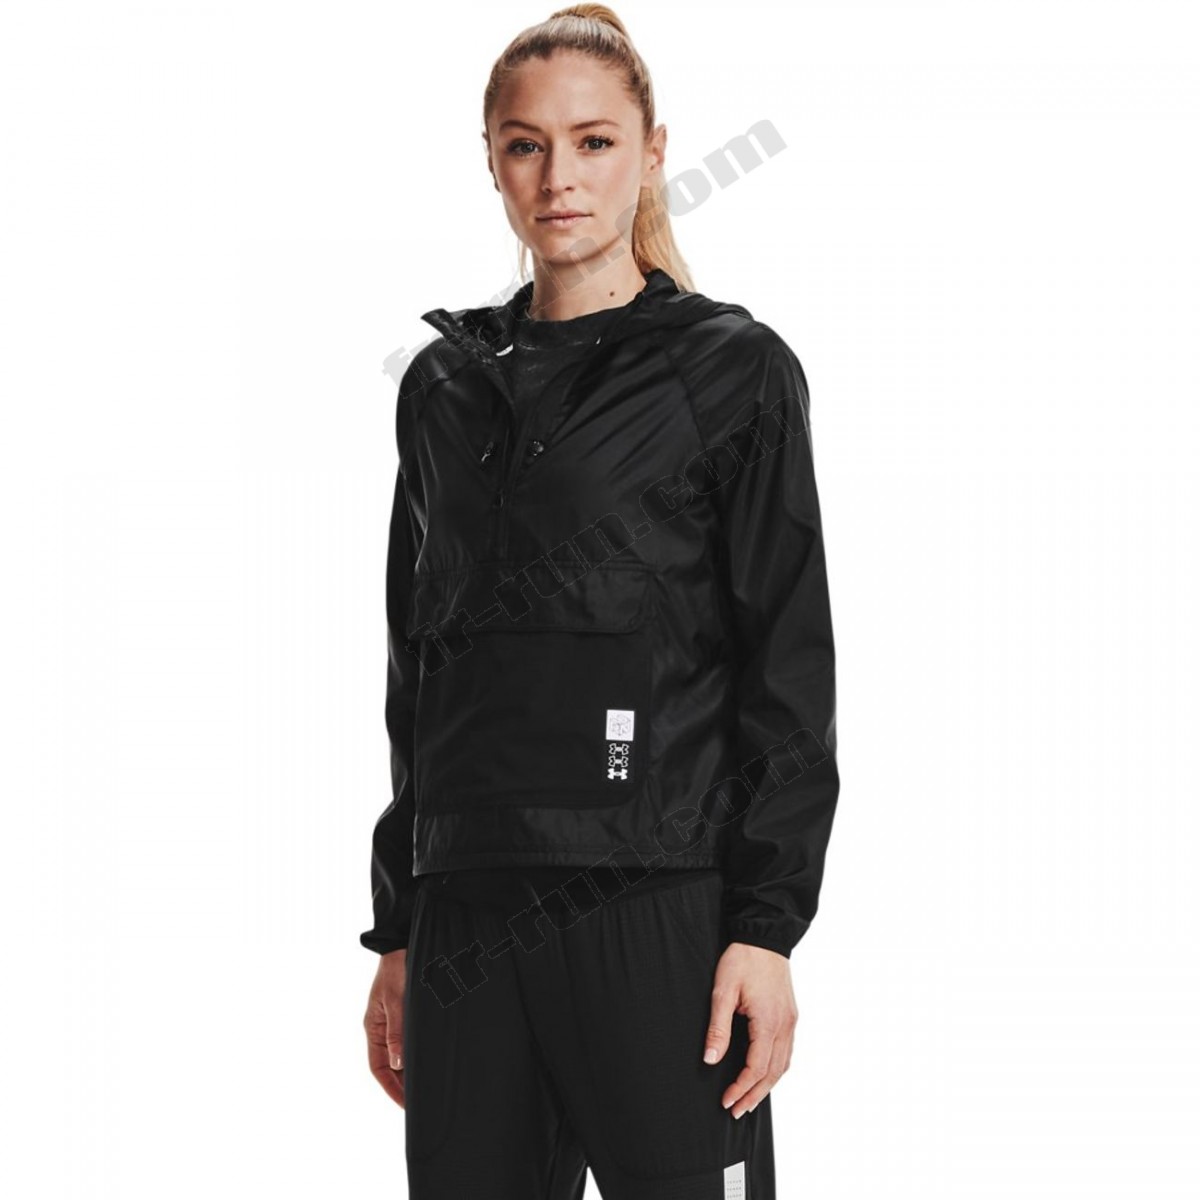 Under Armour/running femme UNDER ARMOUR Under Armour Run Anywhere Anorak √ Nouveau style √ Soldes - -0